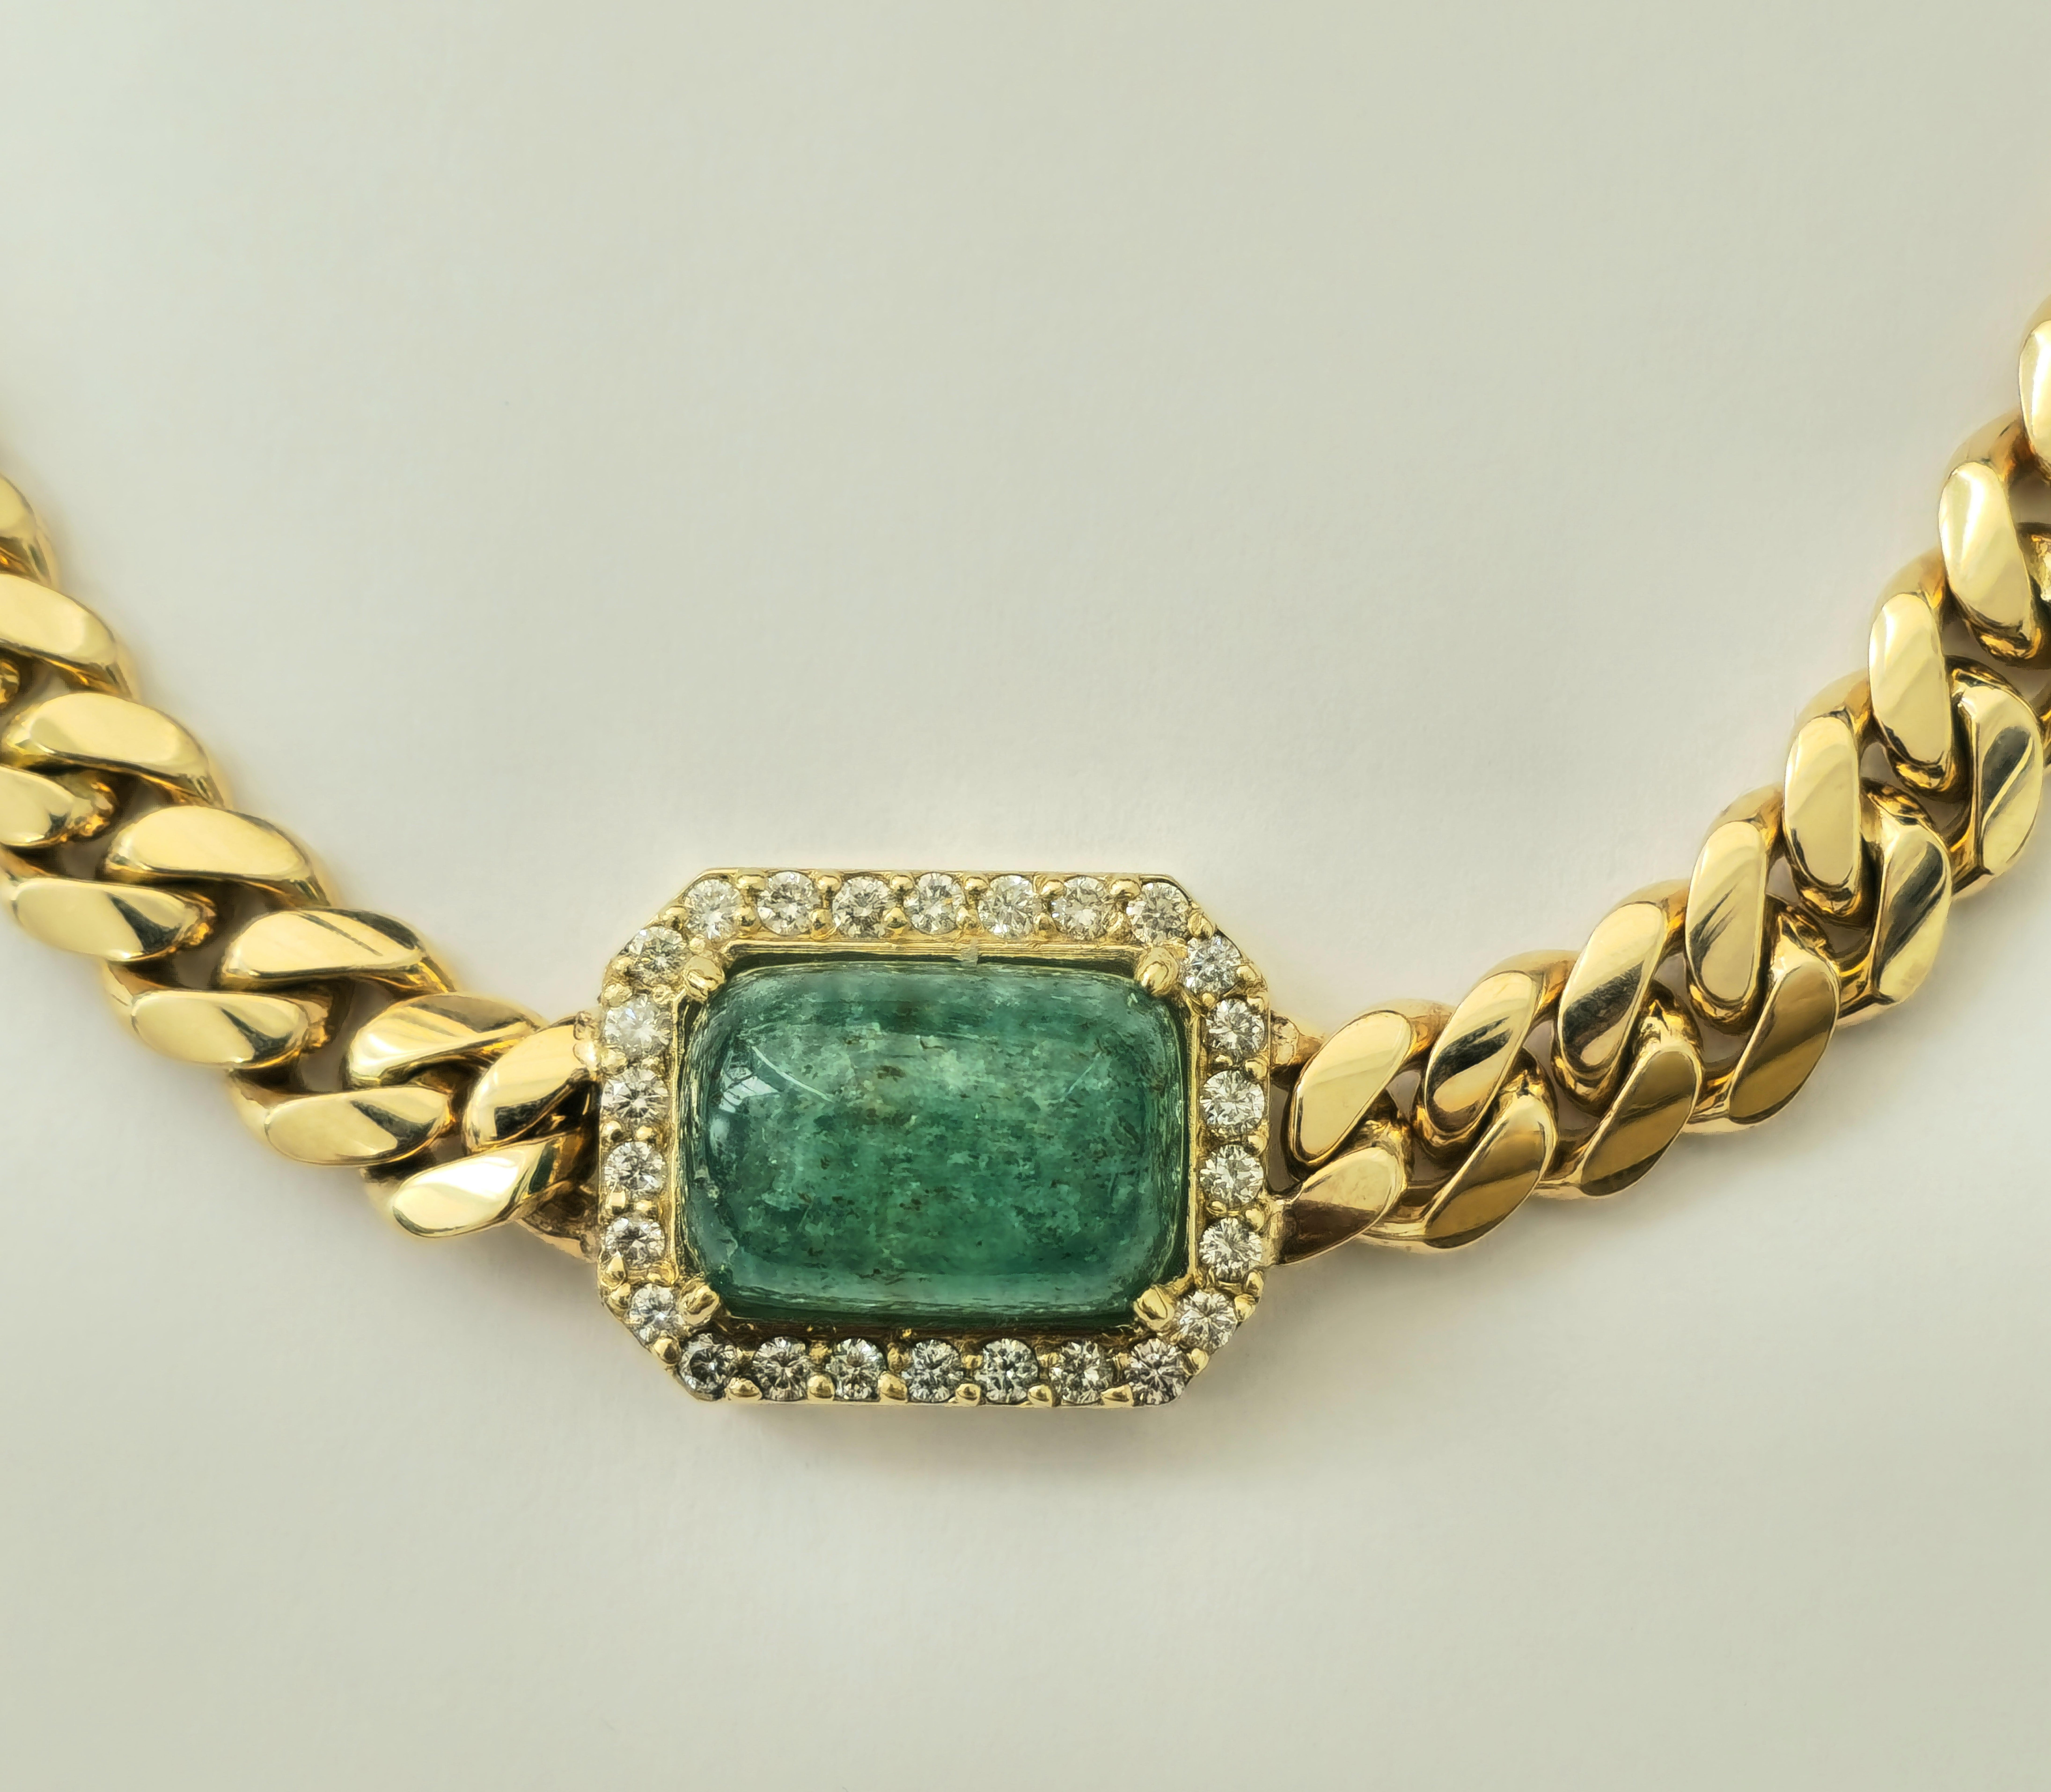 Experience the unparalleled beauty of Colombian emeralds with this breathtaking 14k yellow gold necklace. At its center, a magnificent 12.40 carat sugar loaf-shaped emerald captivates with its vibrant color and exceptional saturation, sourced from